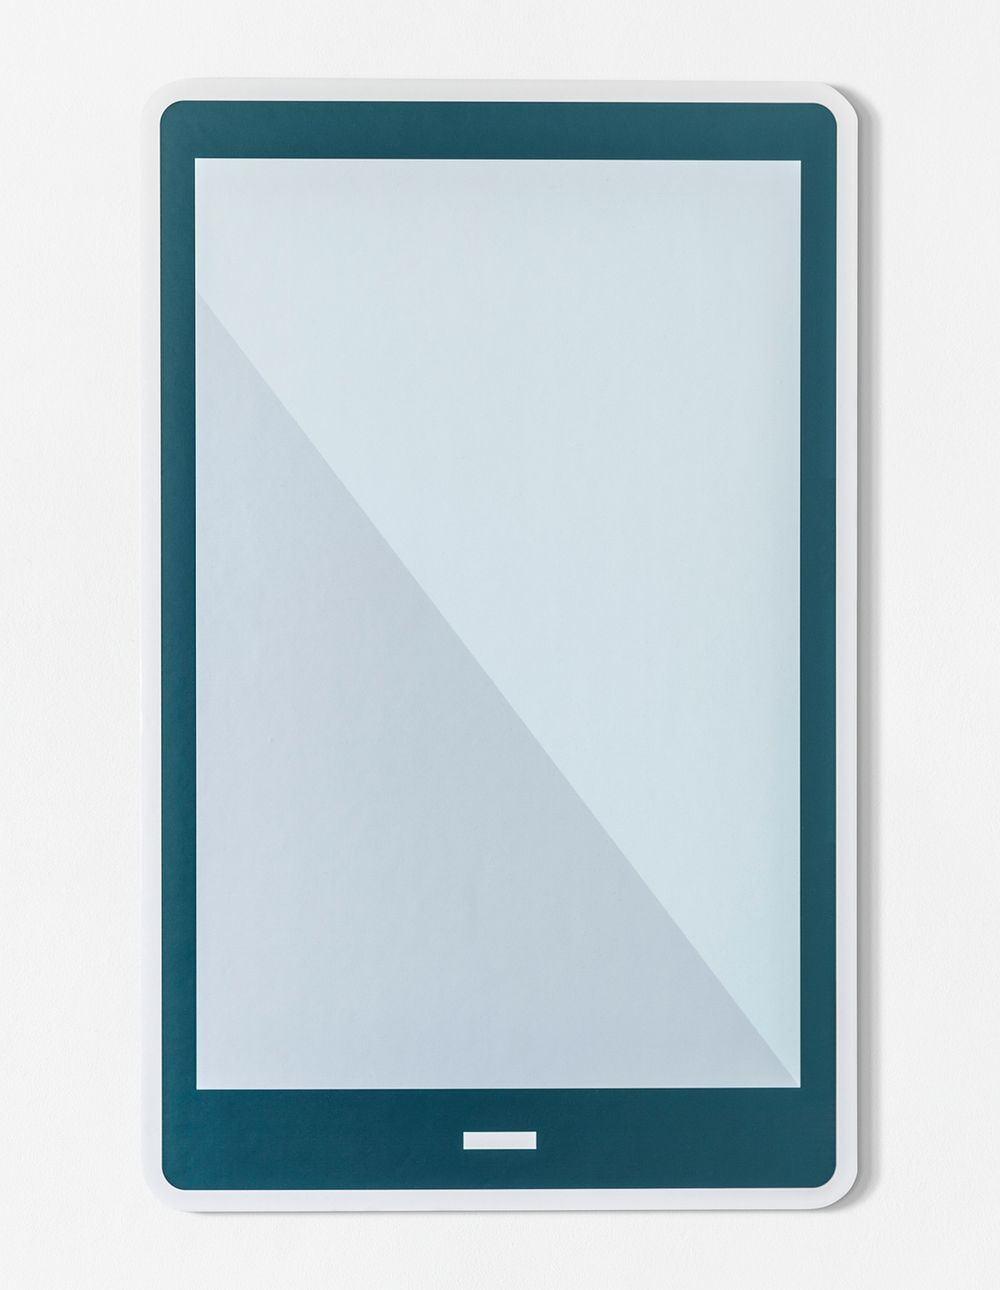 Blank isolated digital tablet icon